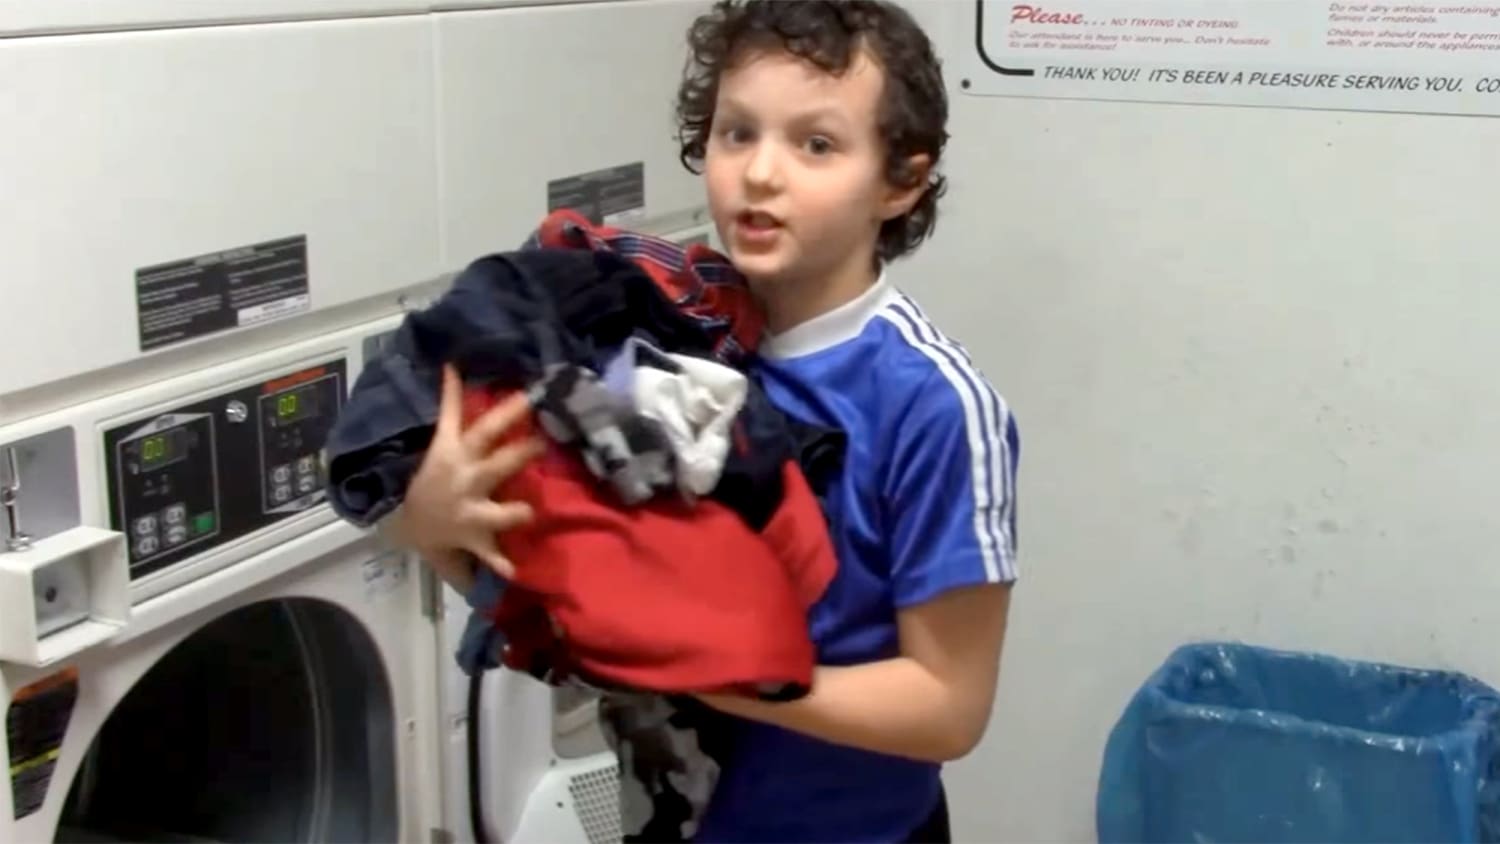 8-year-olds can do laundry: Which chores at what ages? - TODAY.com2500 x 1407